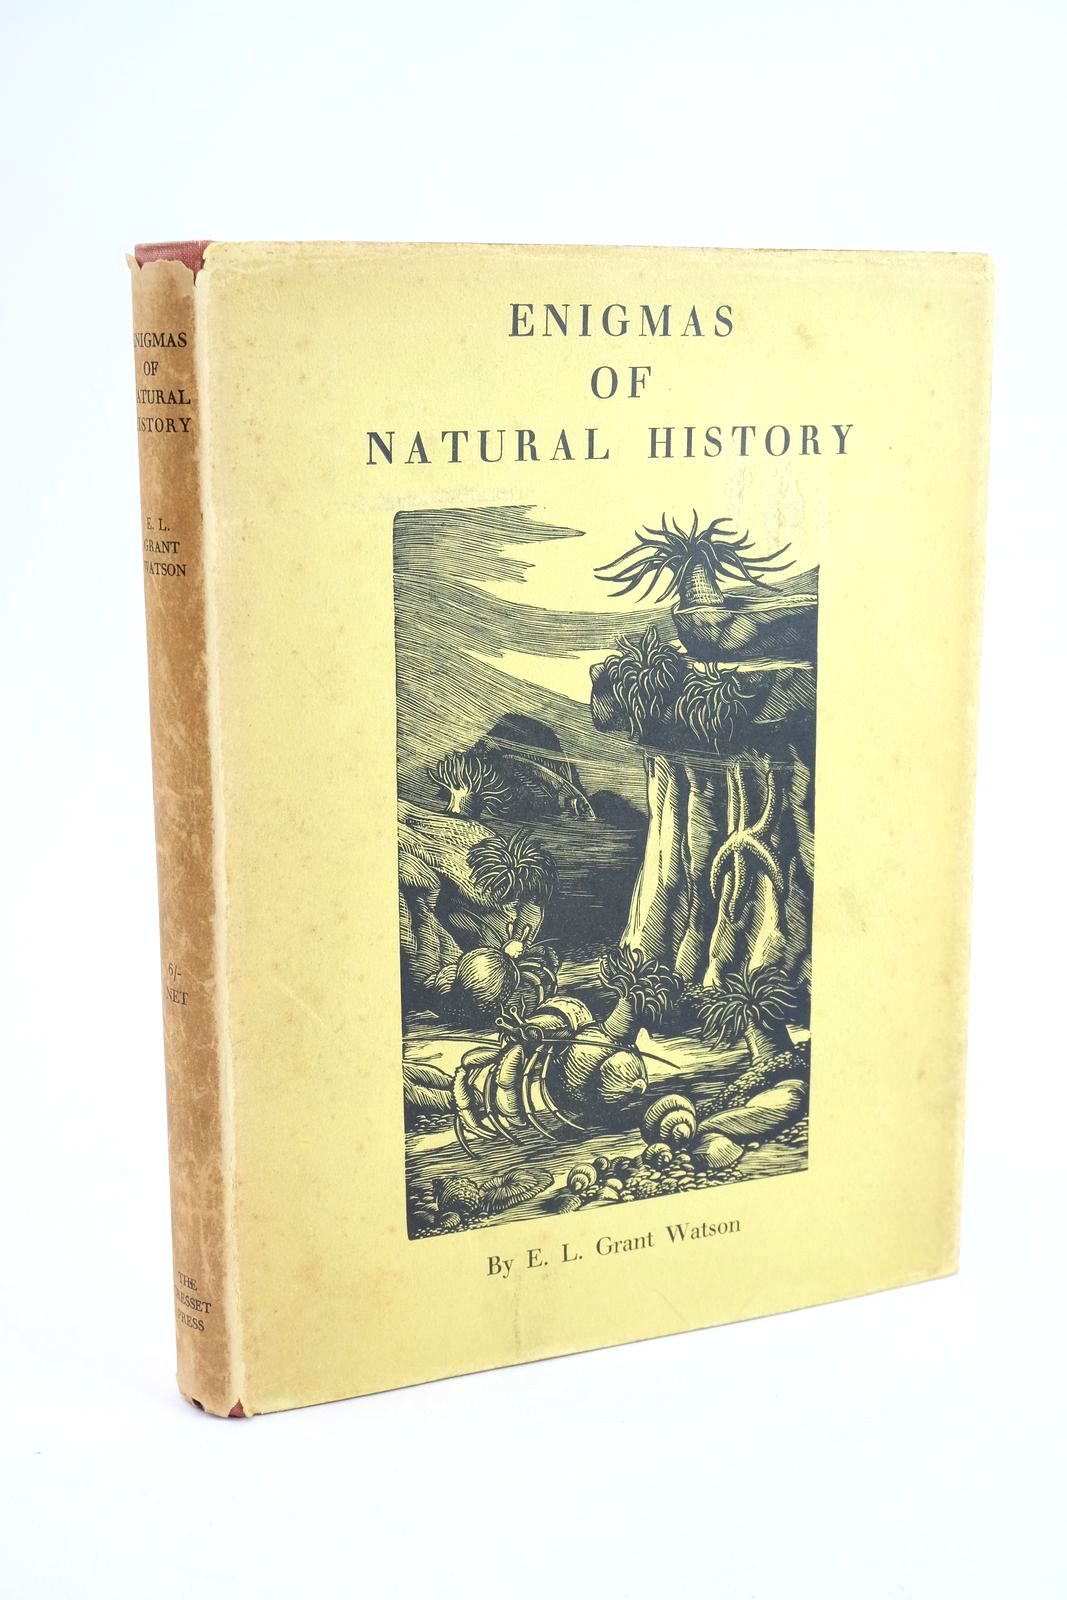 Photo of ENIGMAS OF NATURAL HISTORY written by Watson, E.L. Grant illustrated by Greg, Barbara published by The Cresset Press (STOCK CODE: 1323679)  for sale by Stella & Rose's Books